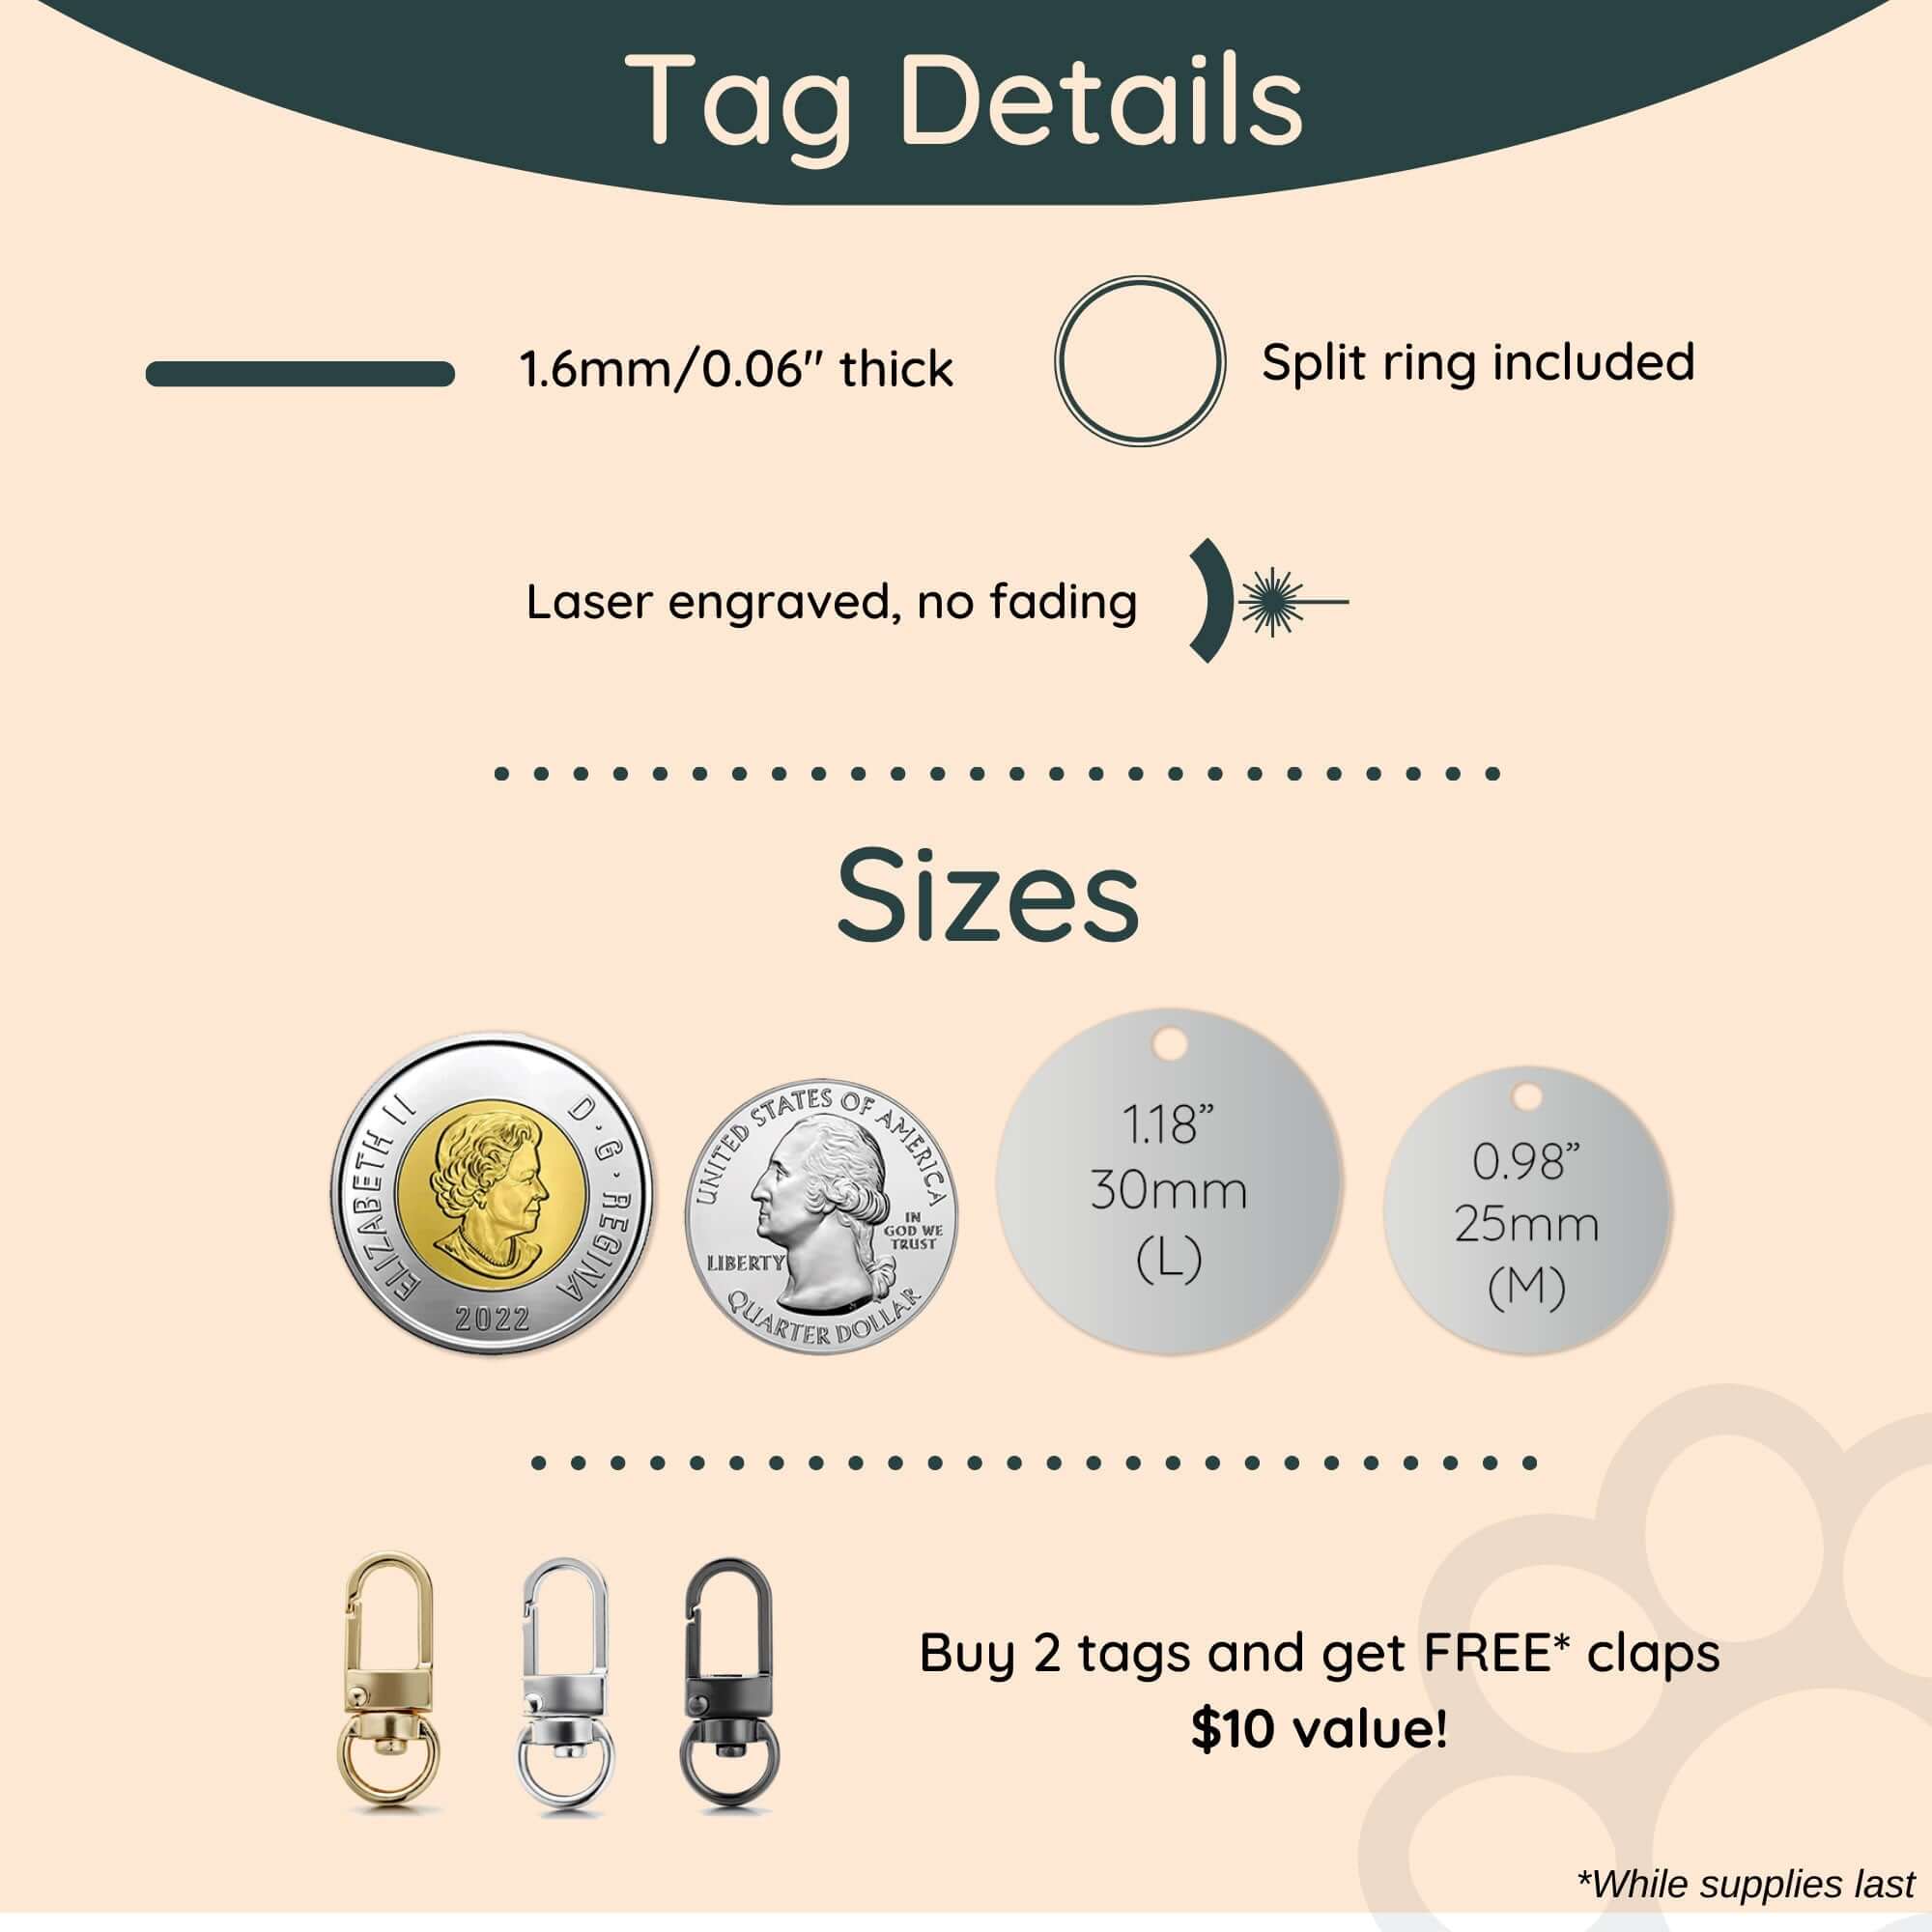 Dog tag size guide